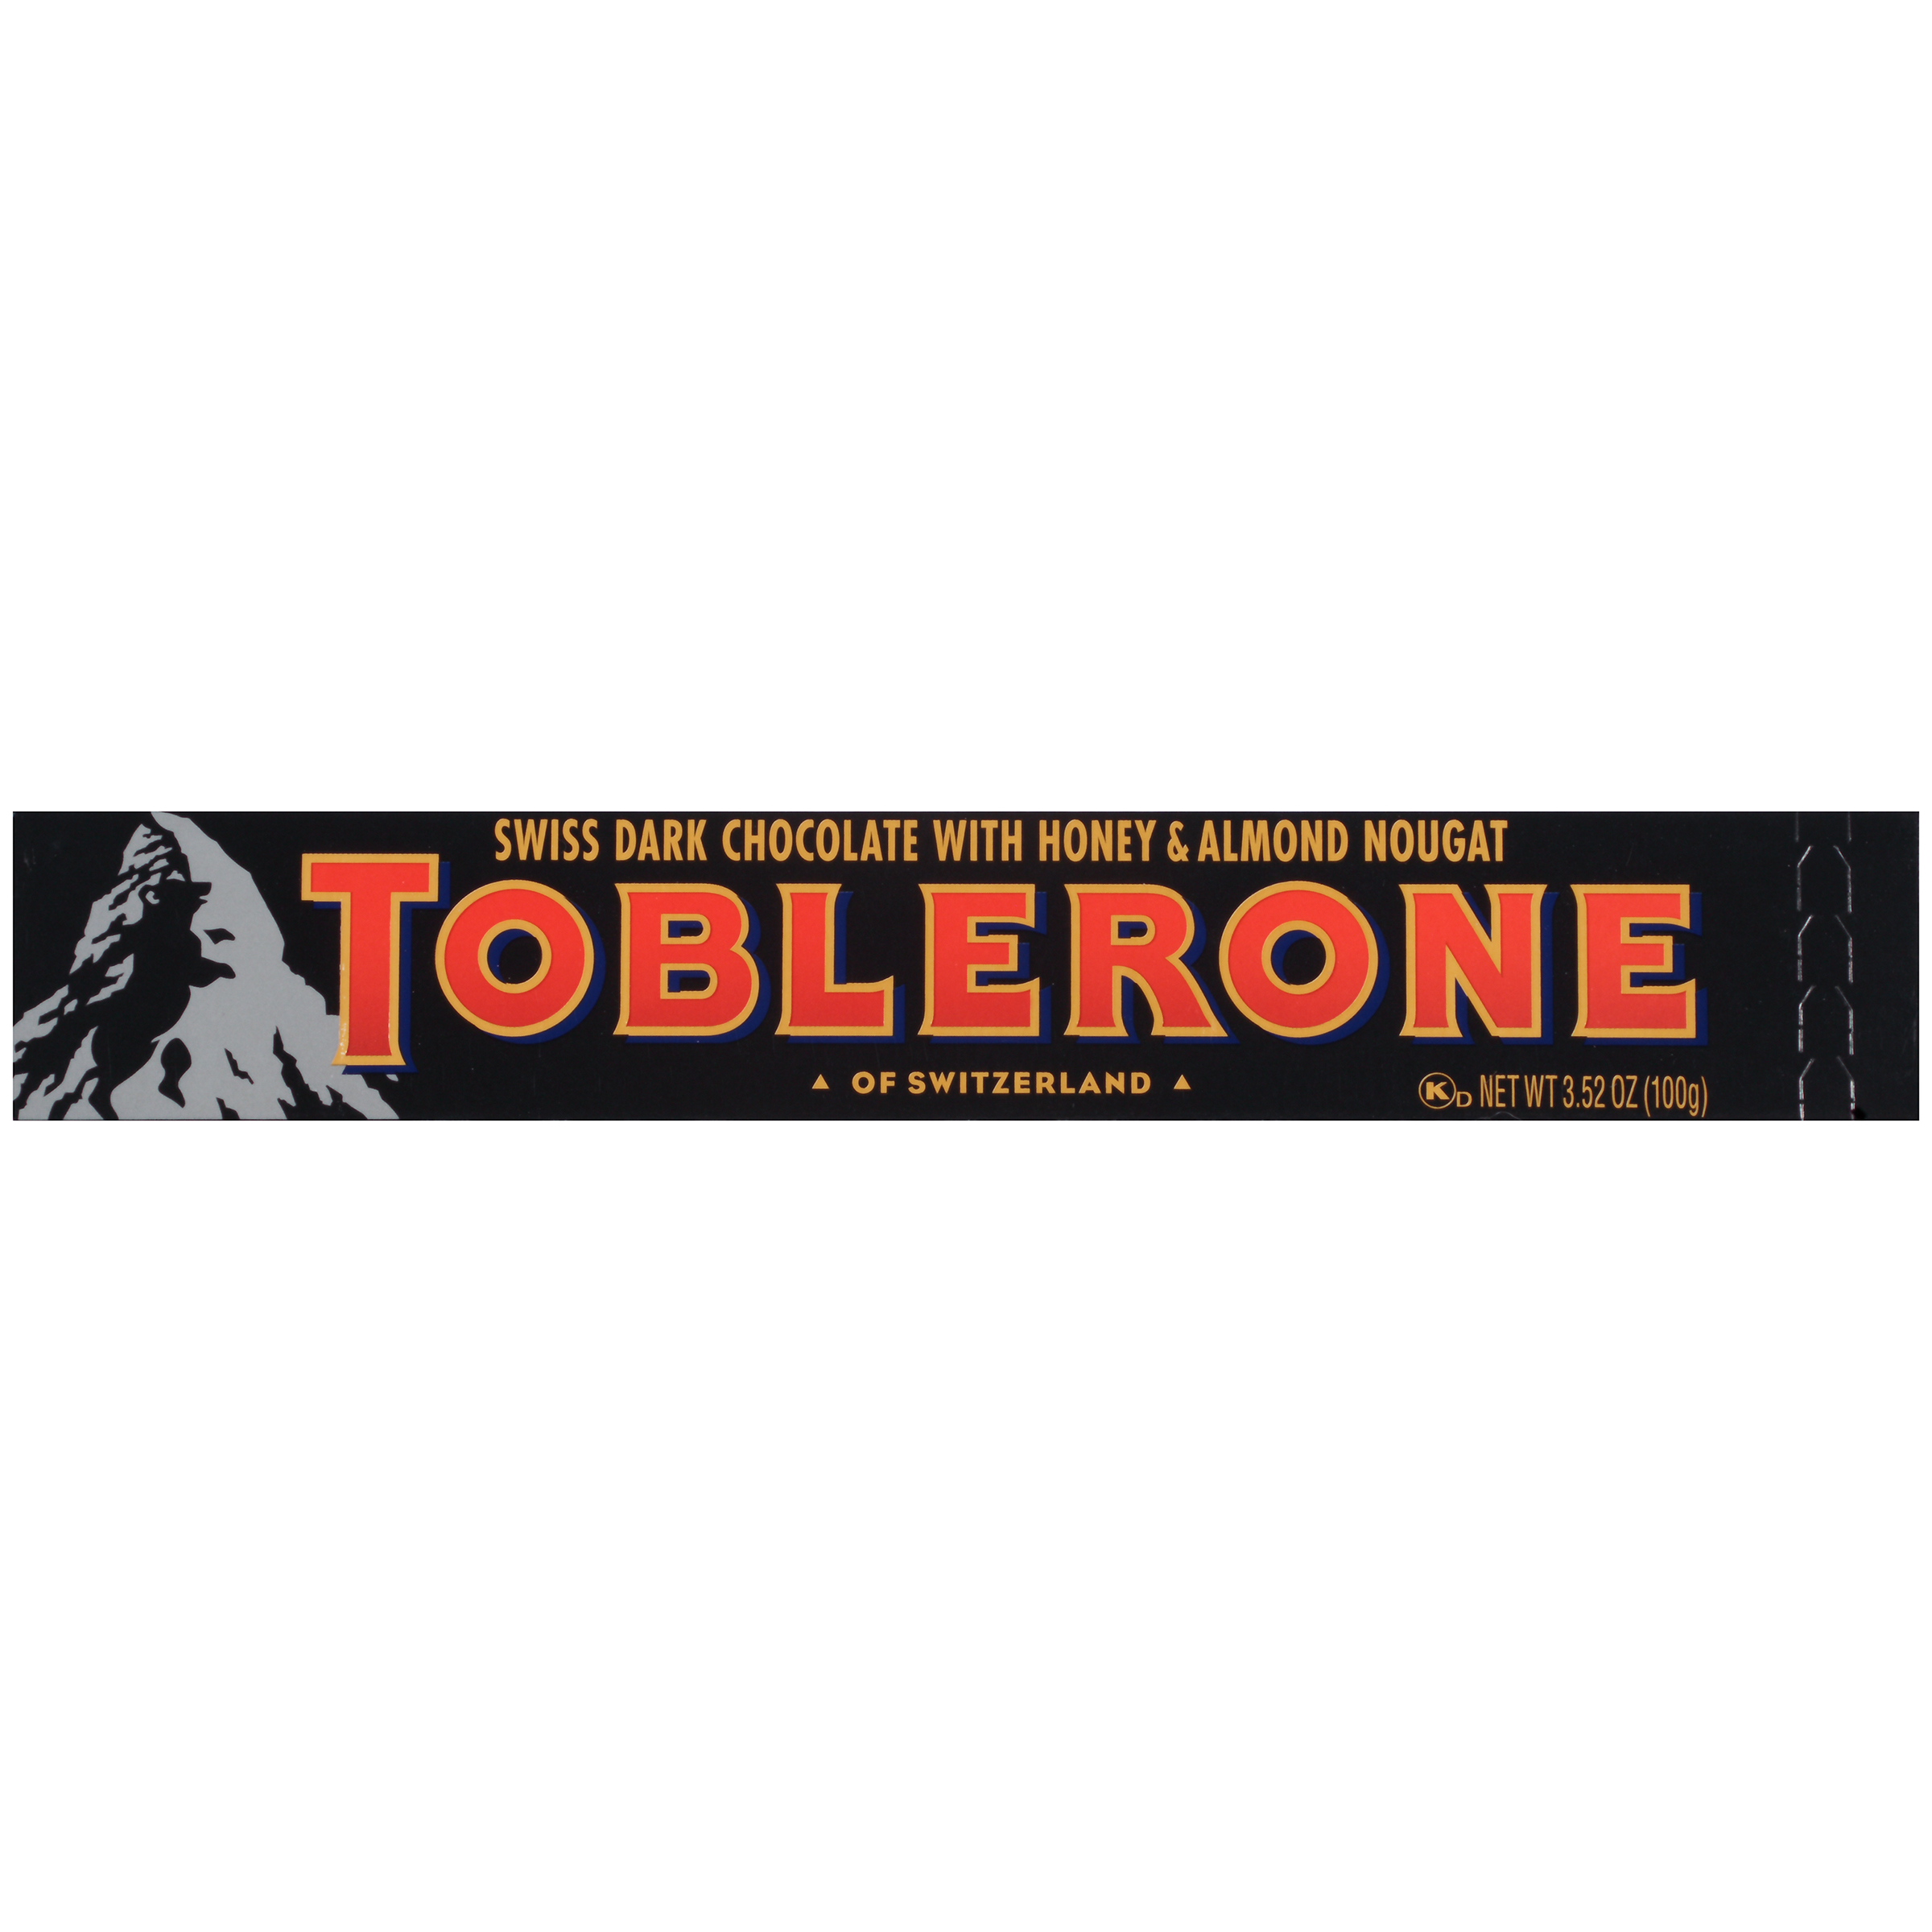 Toblerone Swiss Dark Chocolate Candy Bars with Honey and Almond Nougat, 3.52 oz Bar